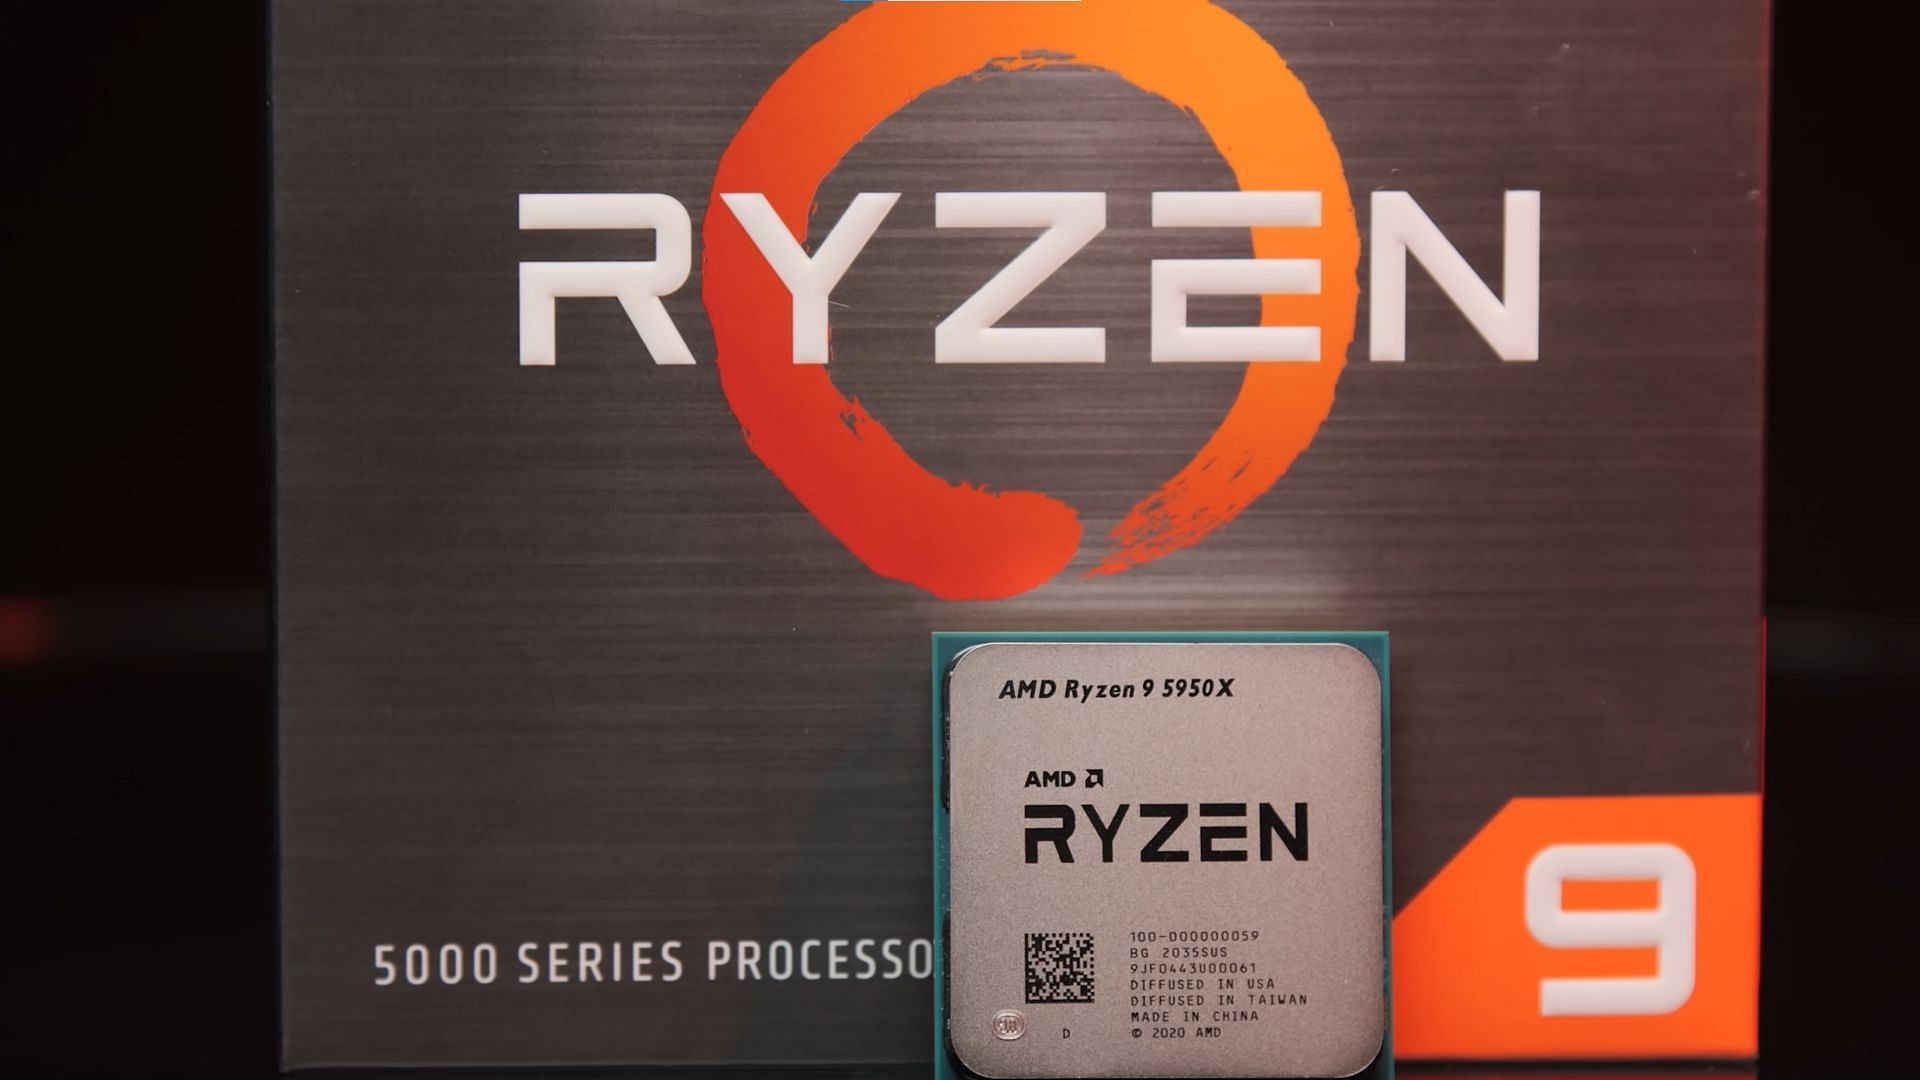 Picture of Ryzen 9 5950X CPU with its box